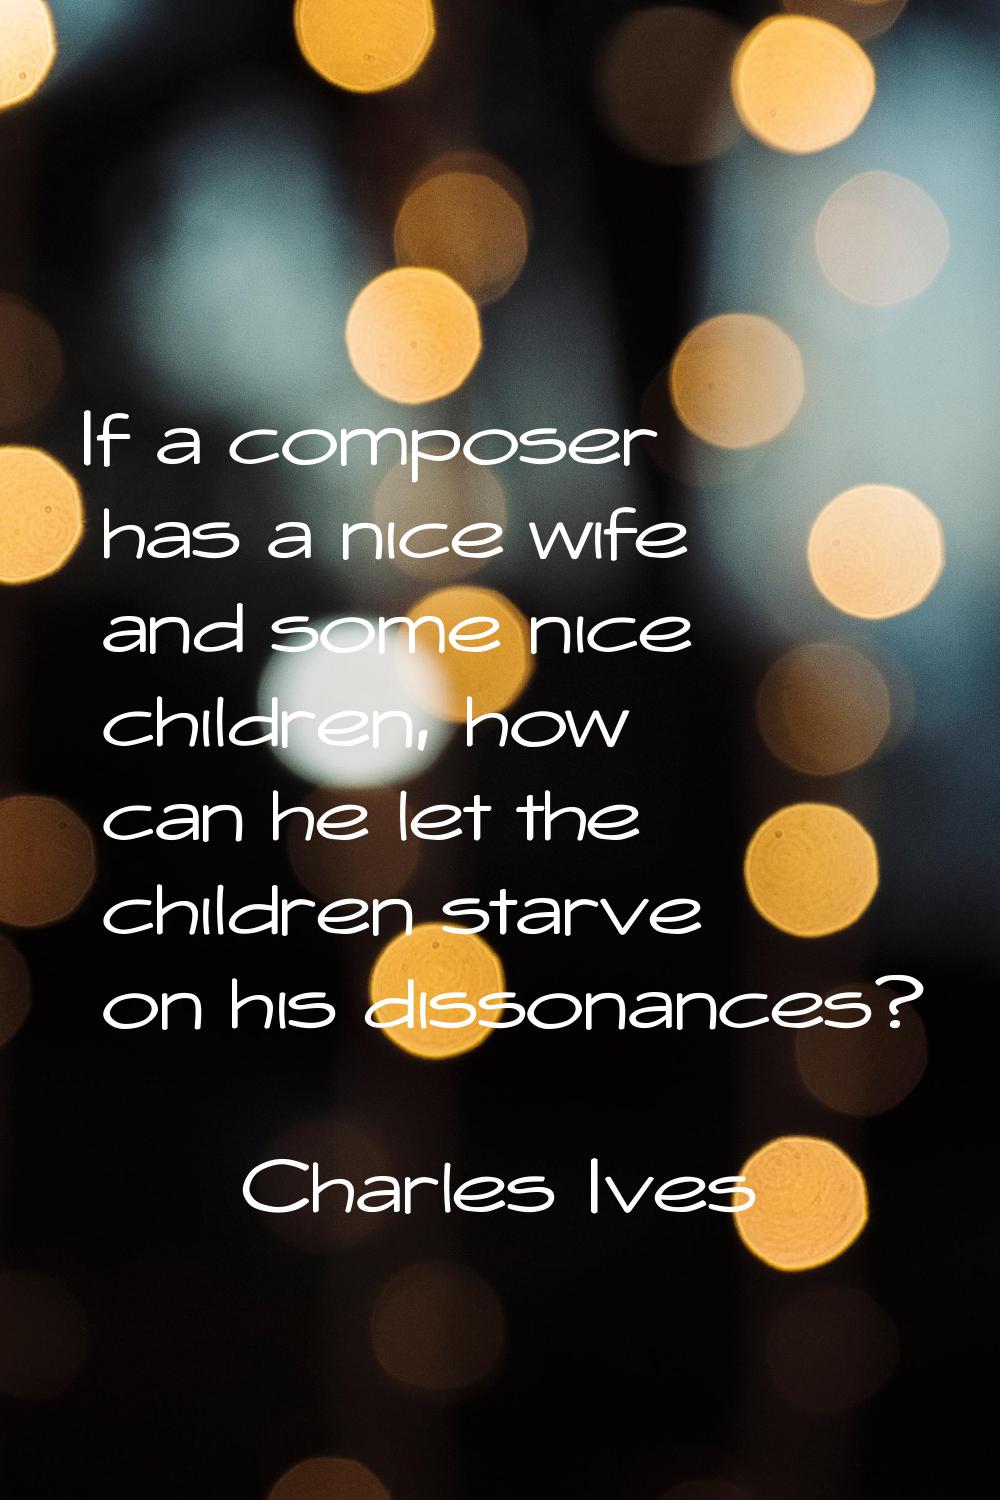 If a composer has a nice wife and some nice children, how can he let the children starve on his dis